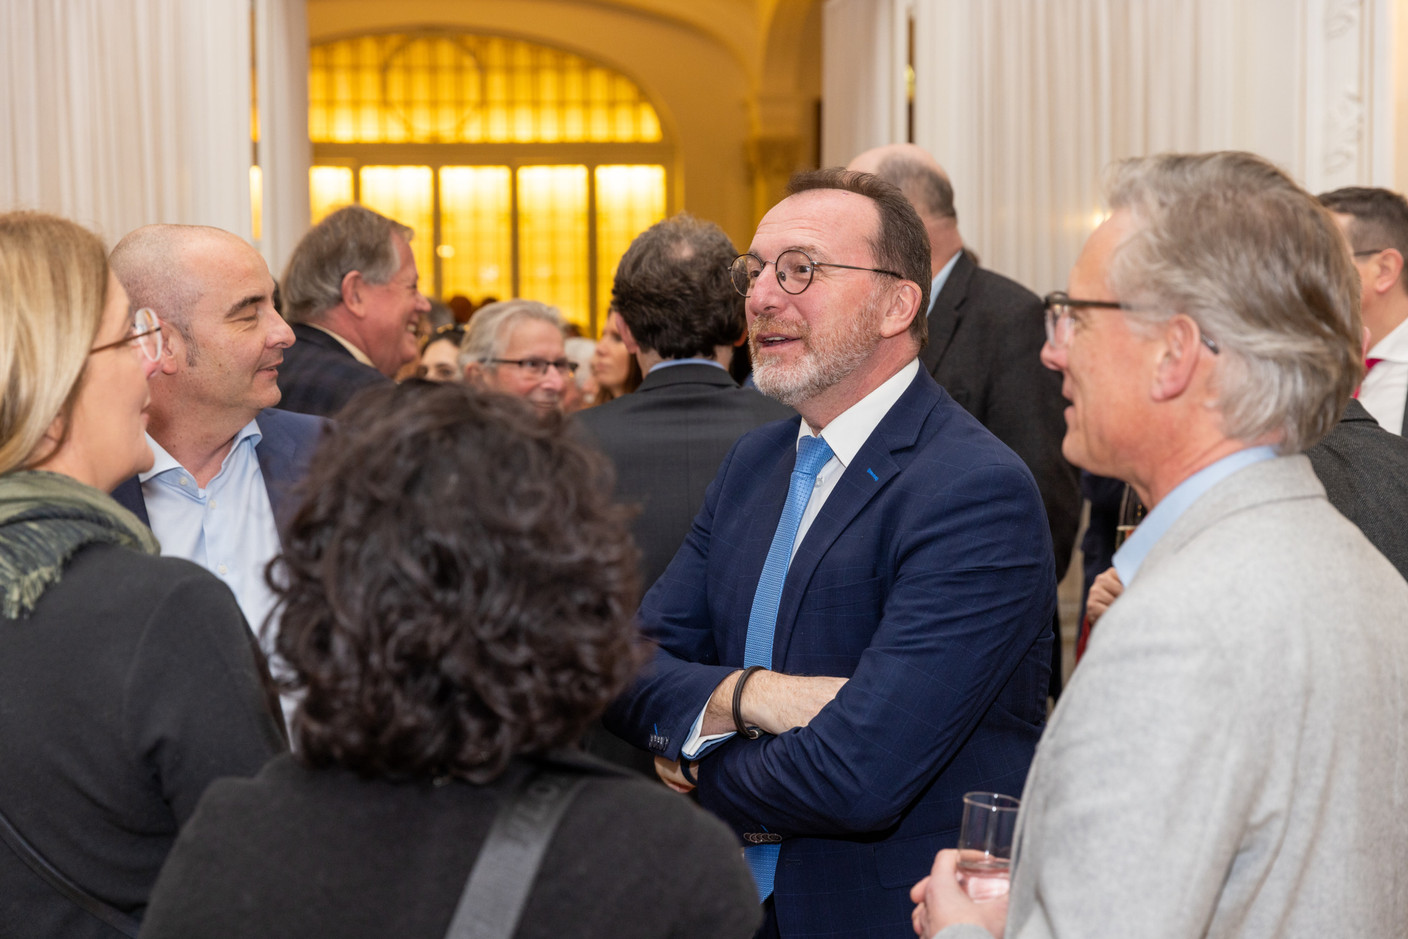 The minister of labour at the New Year’s reception of the Chamber of Employees (CSL) Romain Gamba/Maison Moderne